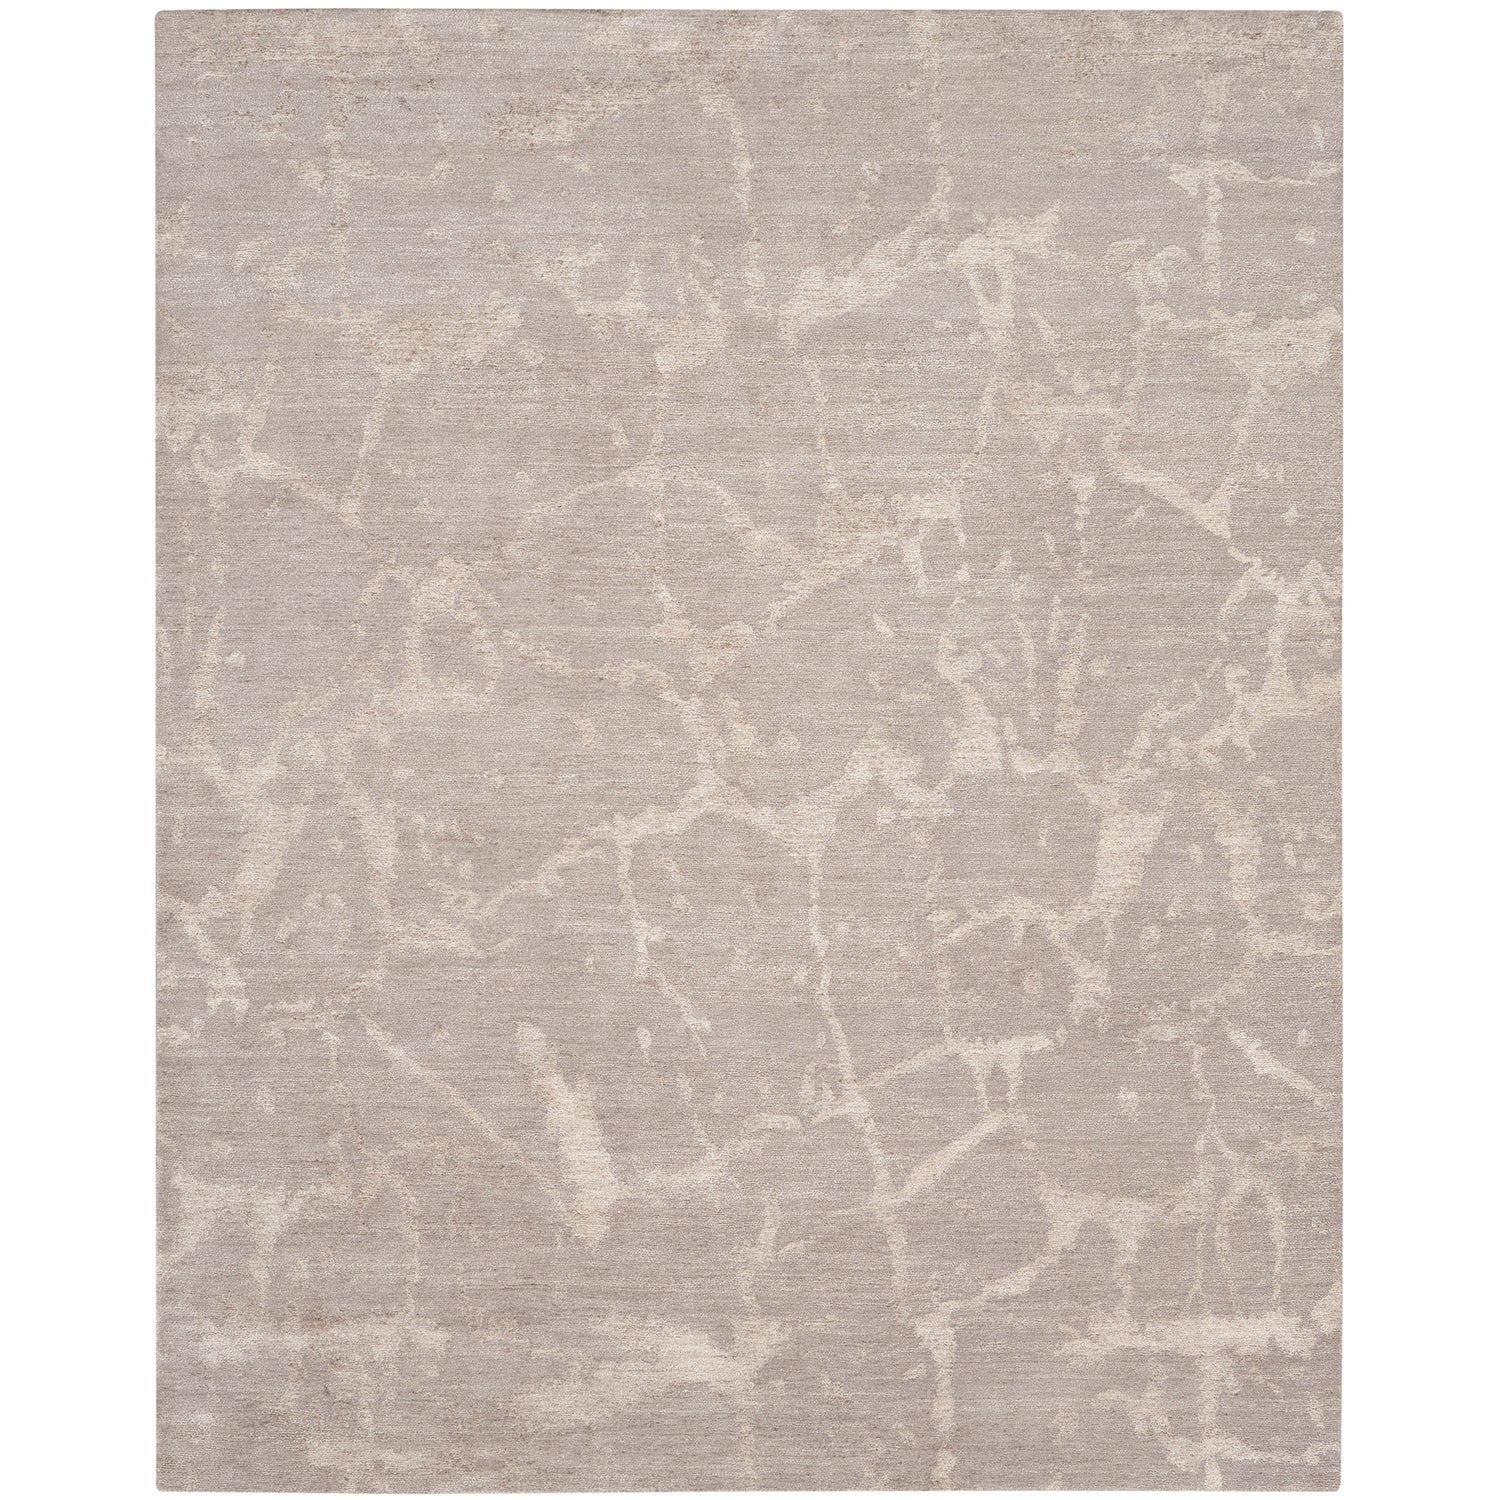 Modern, neutral rug with abstract design and durable construction.